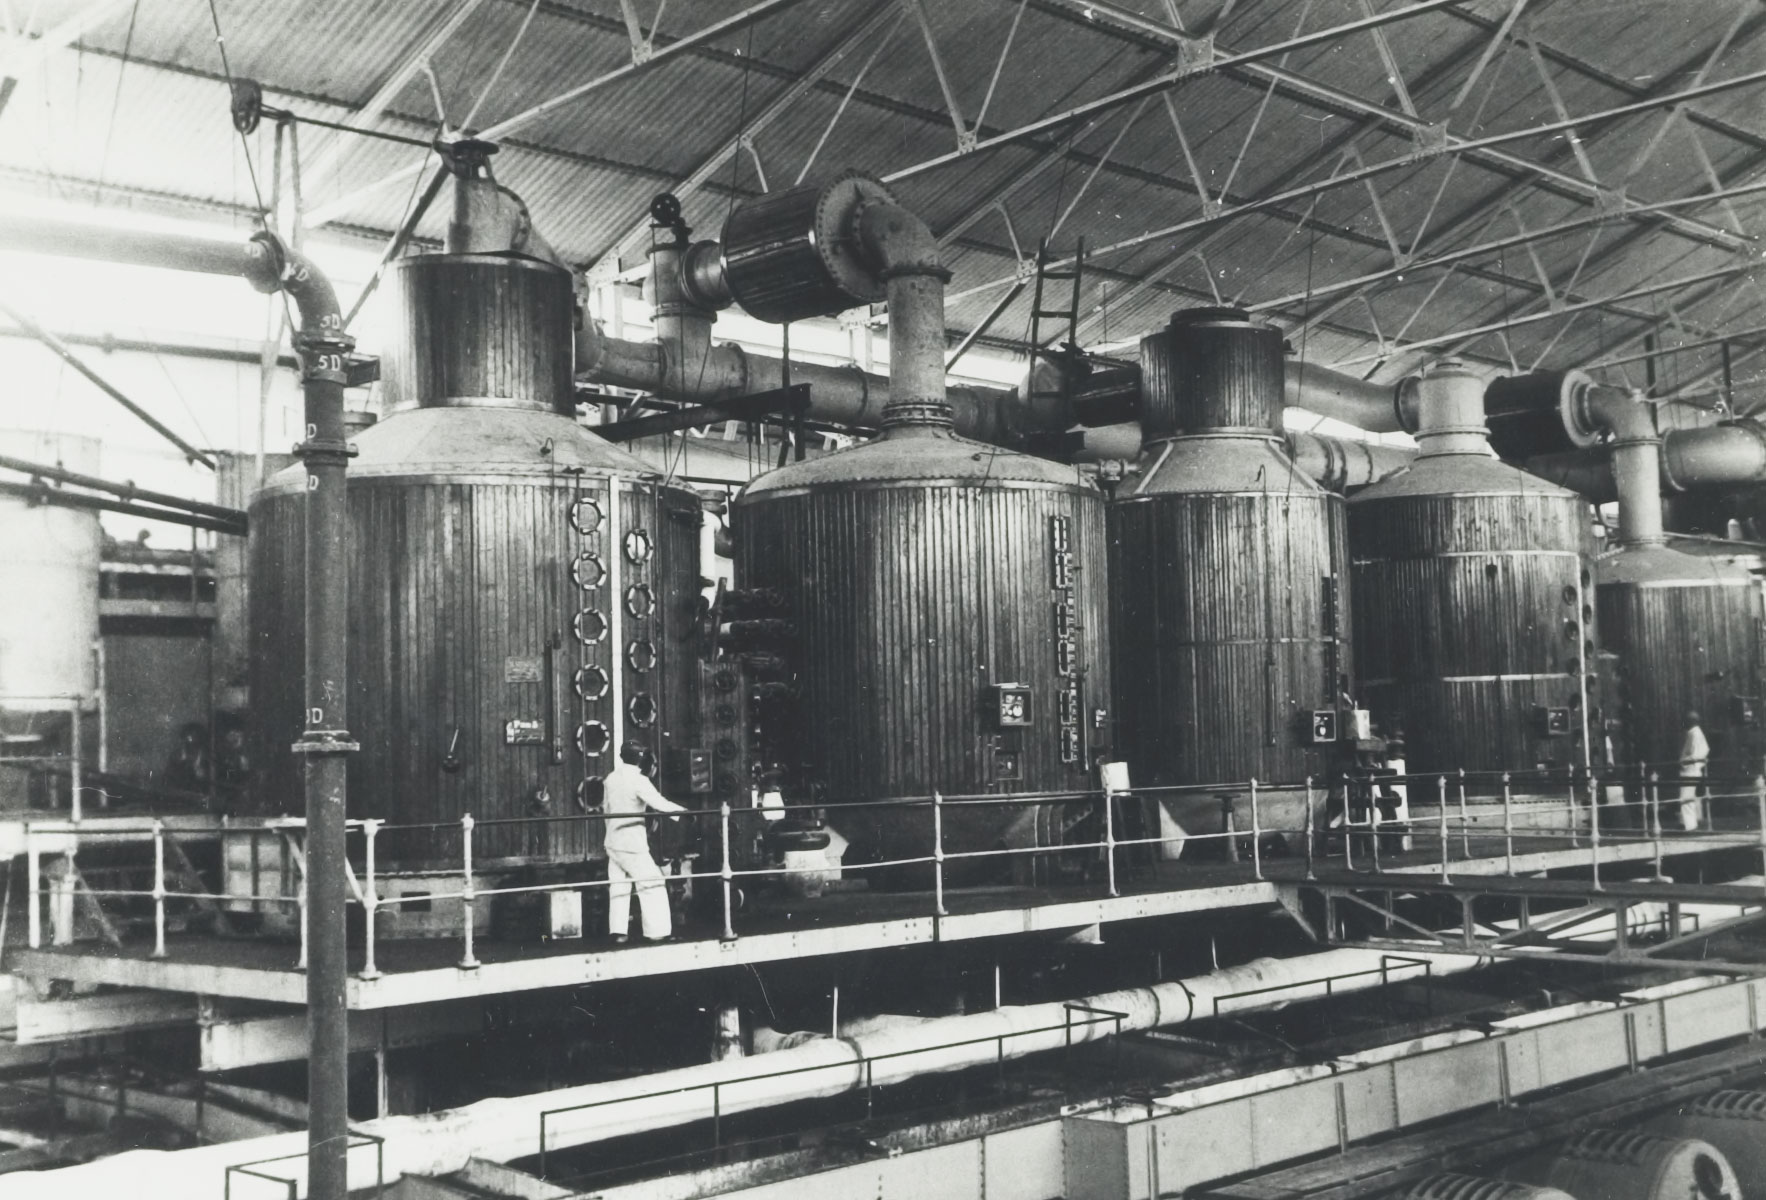 Black and white photograph of the inside of a sugar mill showing vacuum pans, Java, around 1940. The vacuum pans are a row of tall metal cylinders.